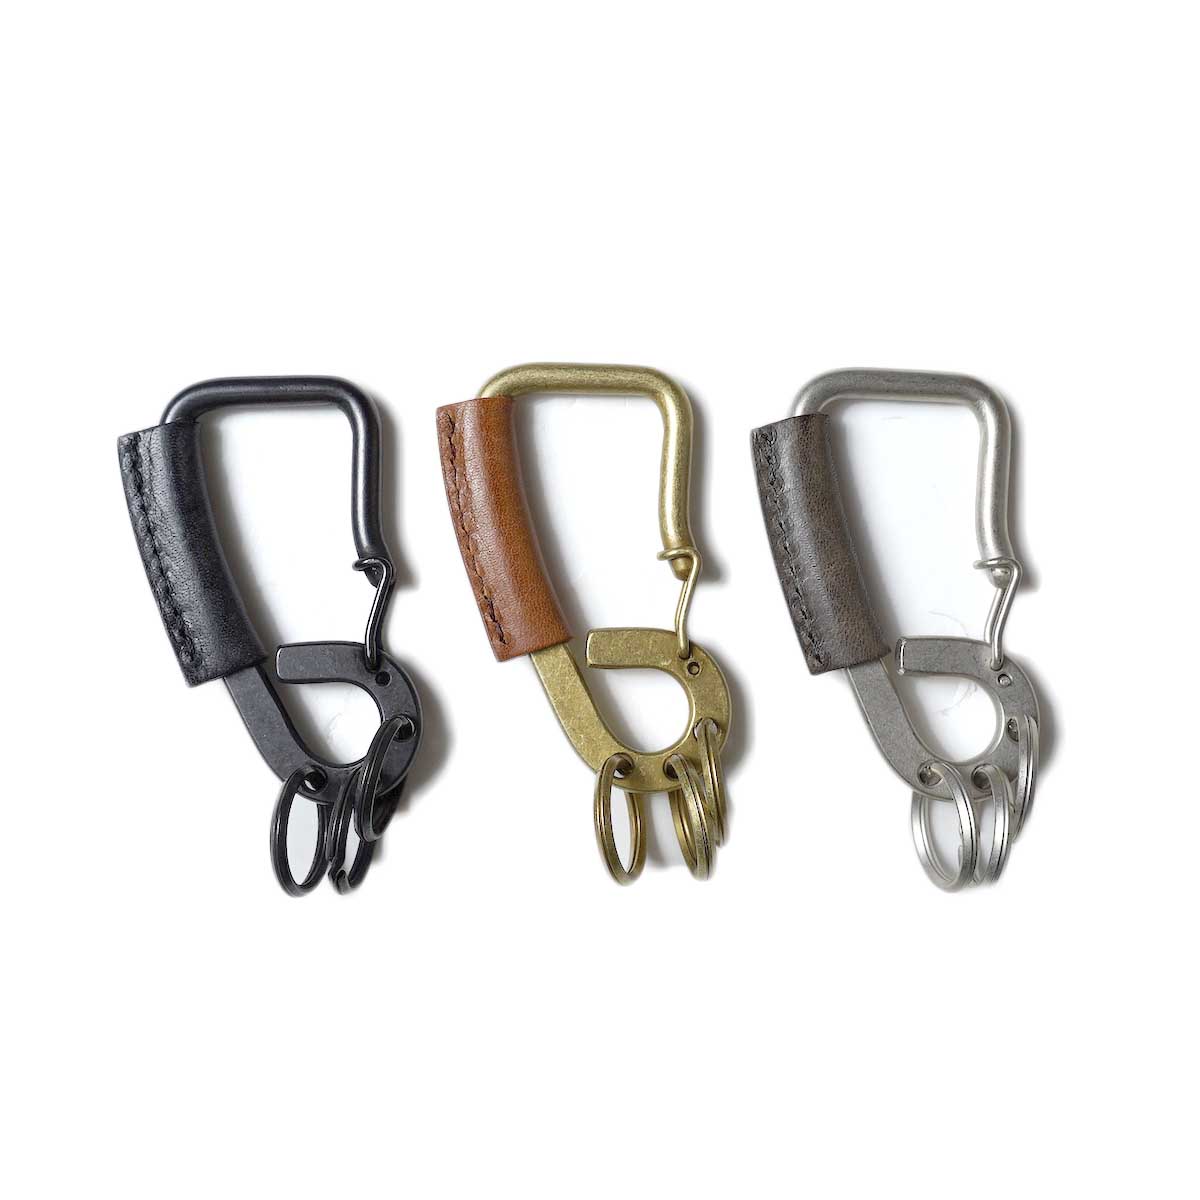 HOBO / CARABINER KEY RING OILED COW LEATHER